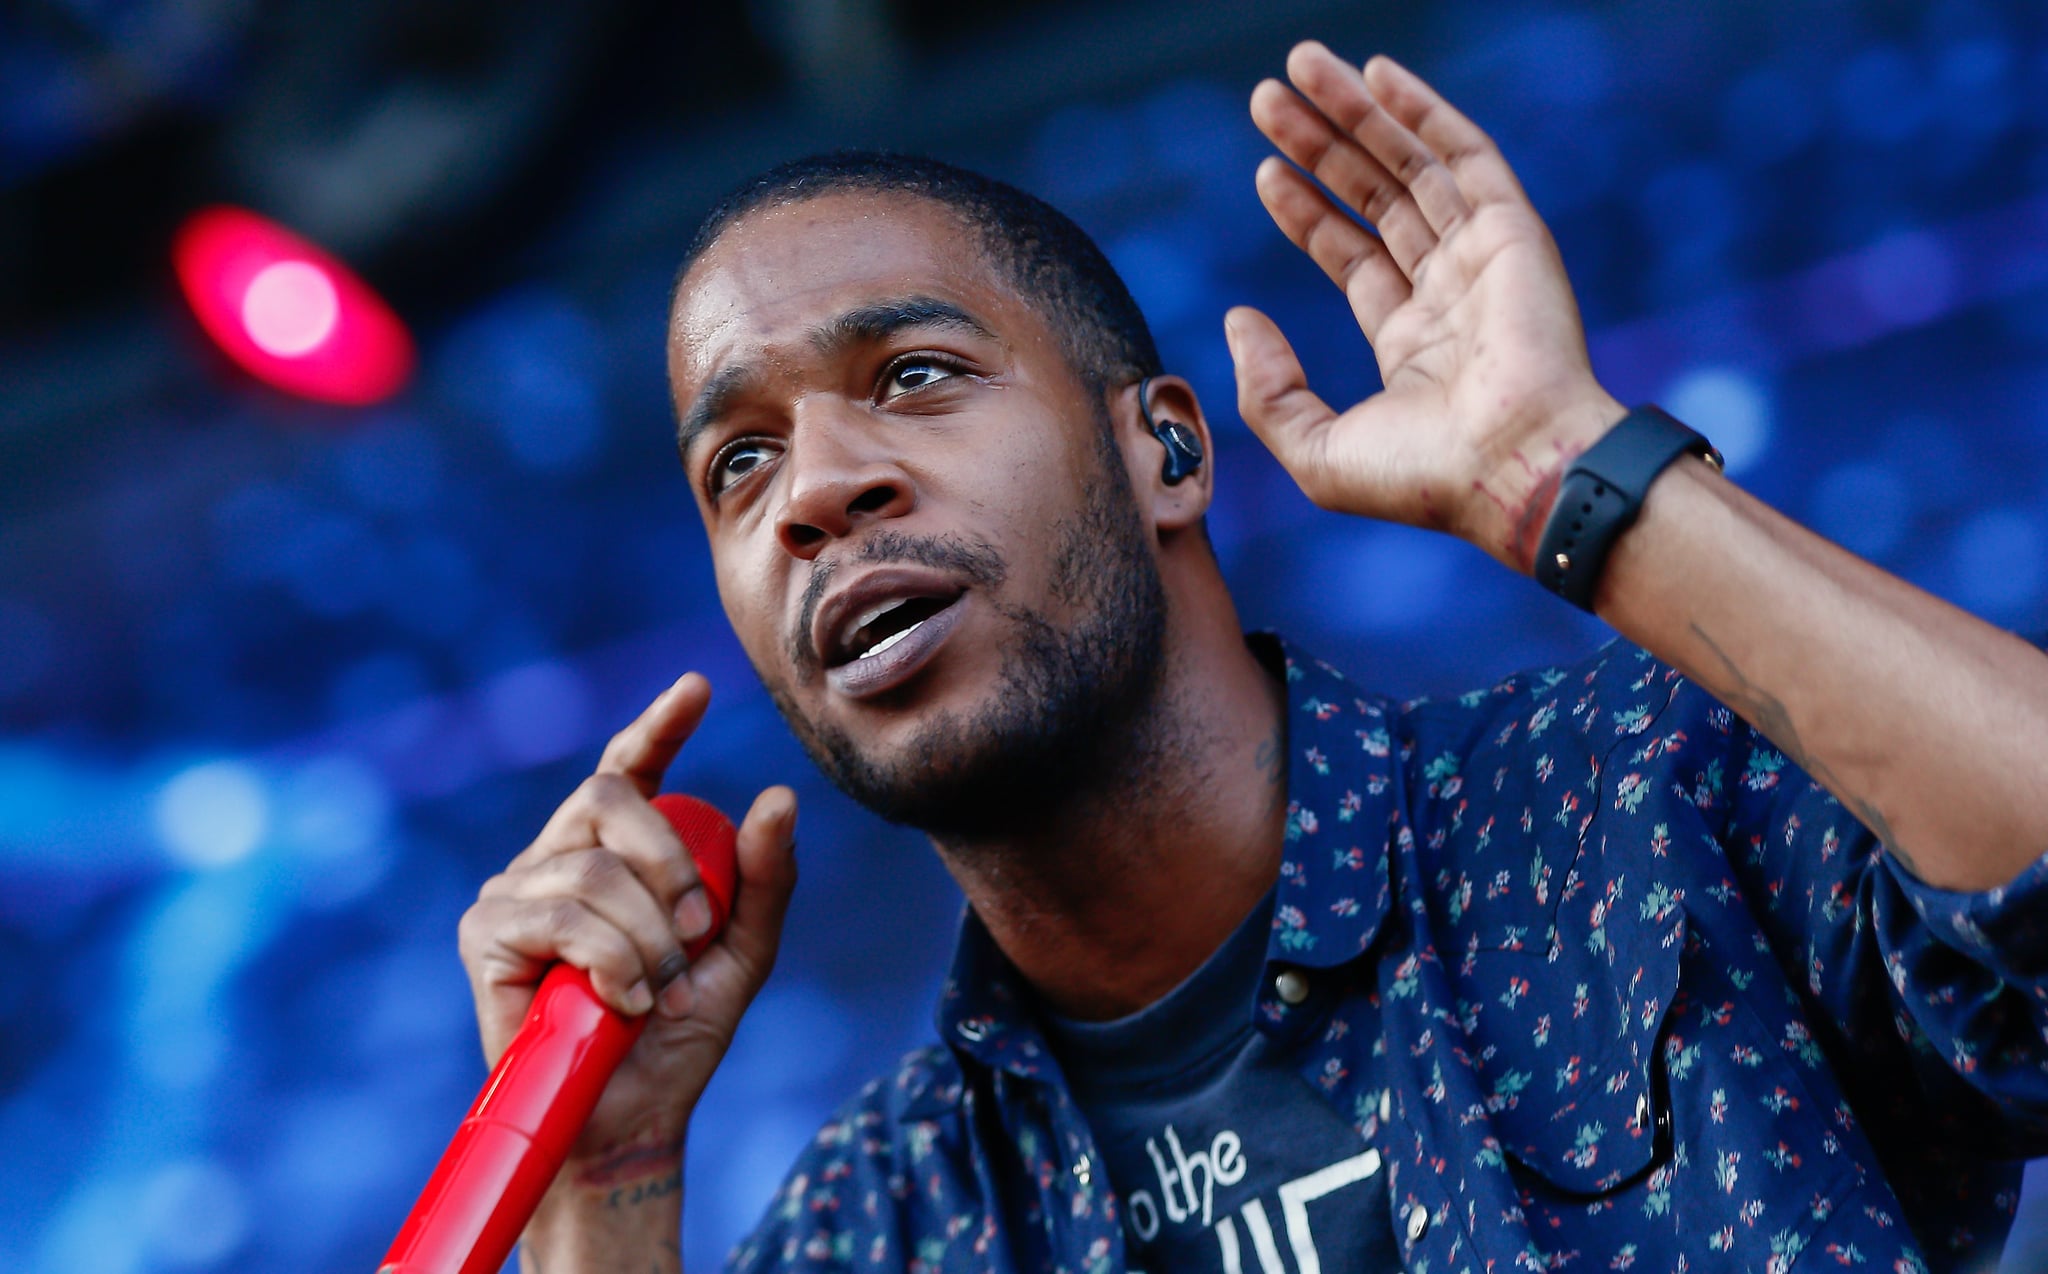 CHICAGO - AUG 01: Kid Cudi performs at 2015 Lollapalooza  at Grant Park on August 1, 2015 in Chicago, Illinois  (Photo by Michael Hickey/Getty Images)